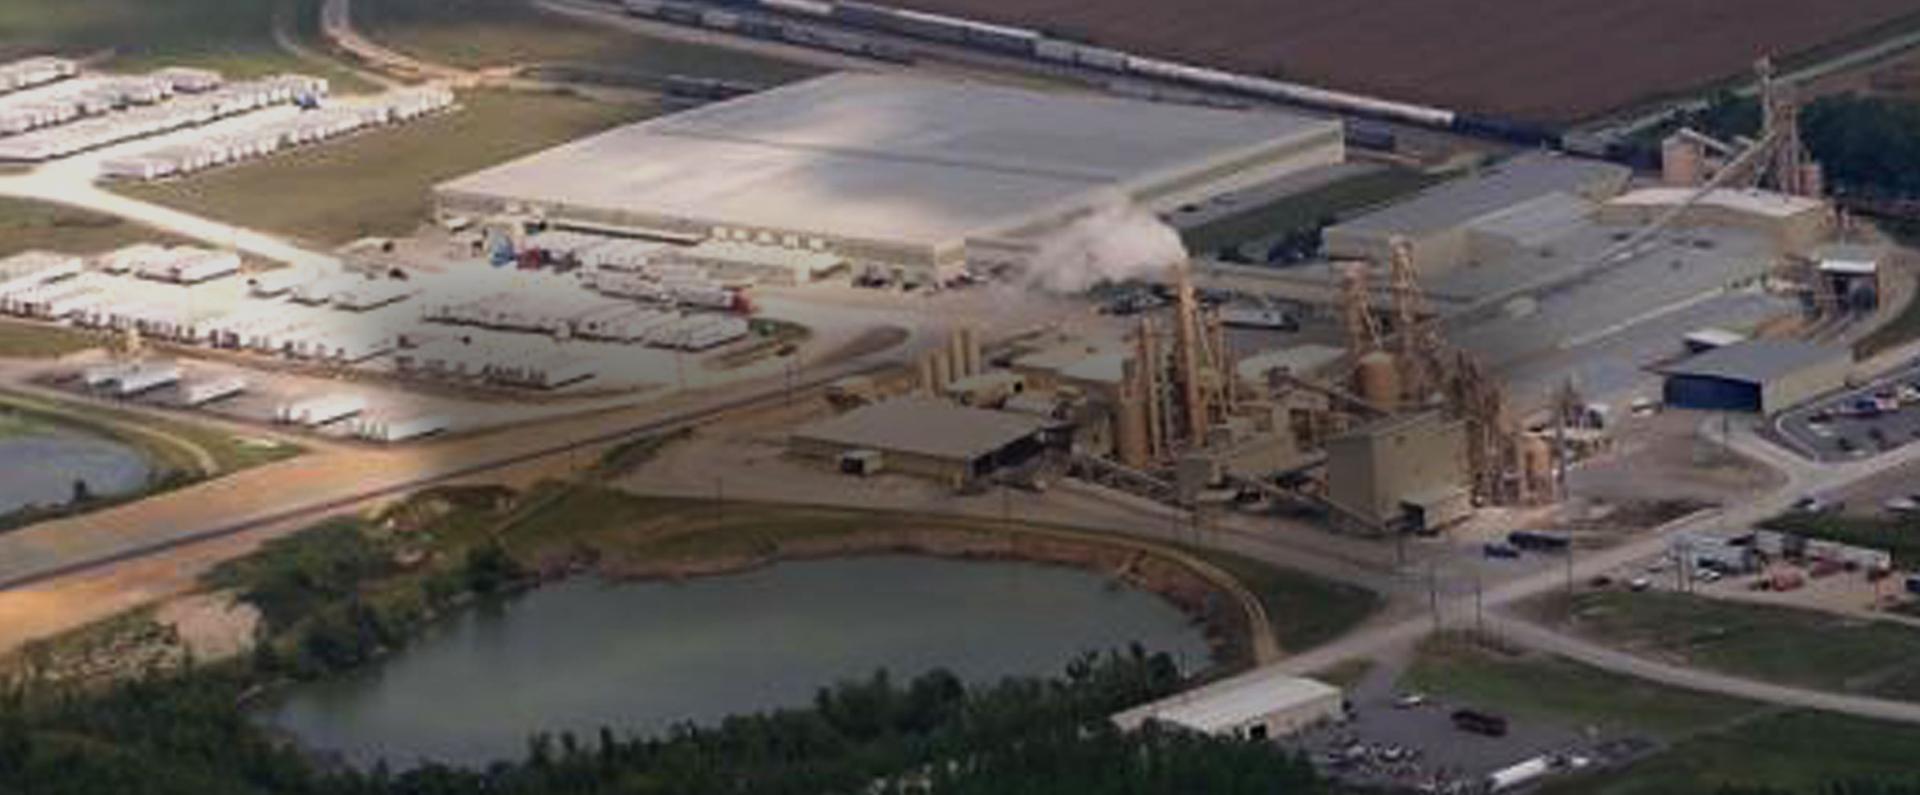 Aerial view of Purina factory in Bloomfield, MO